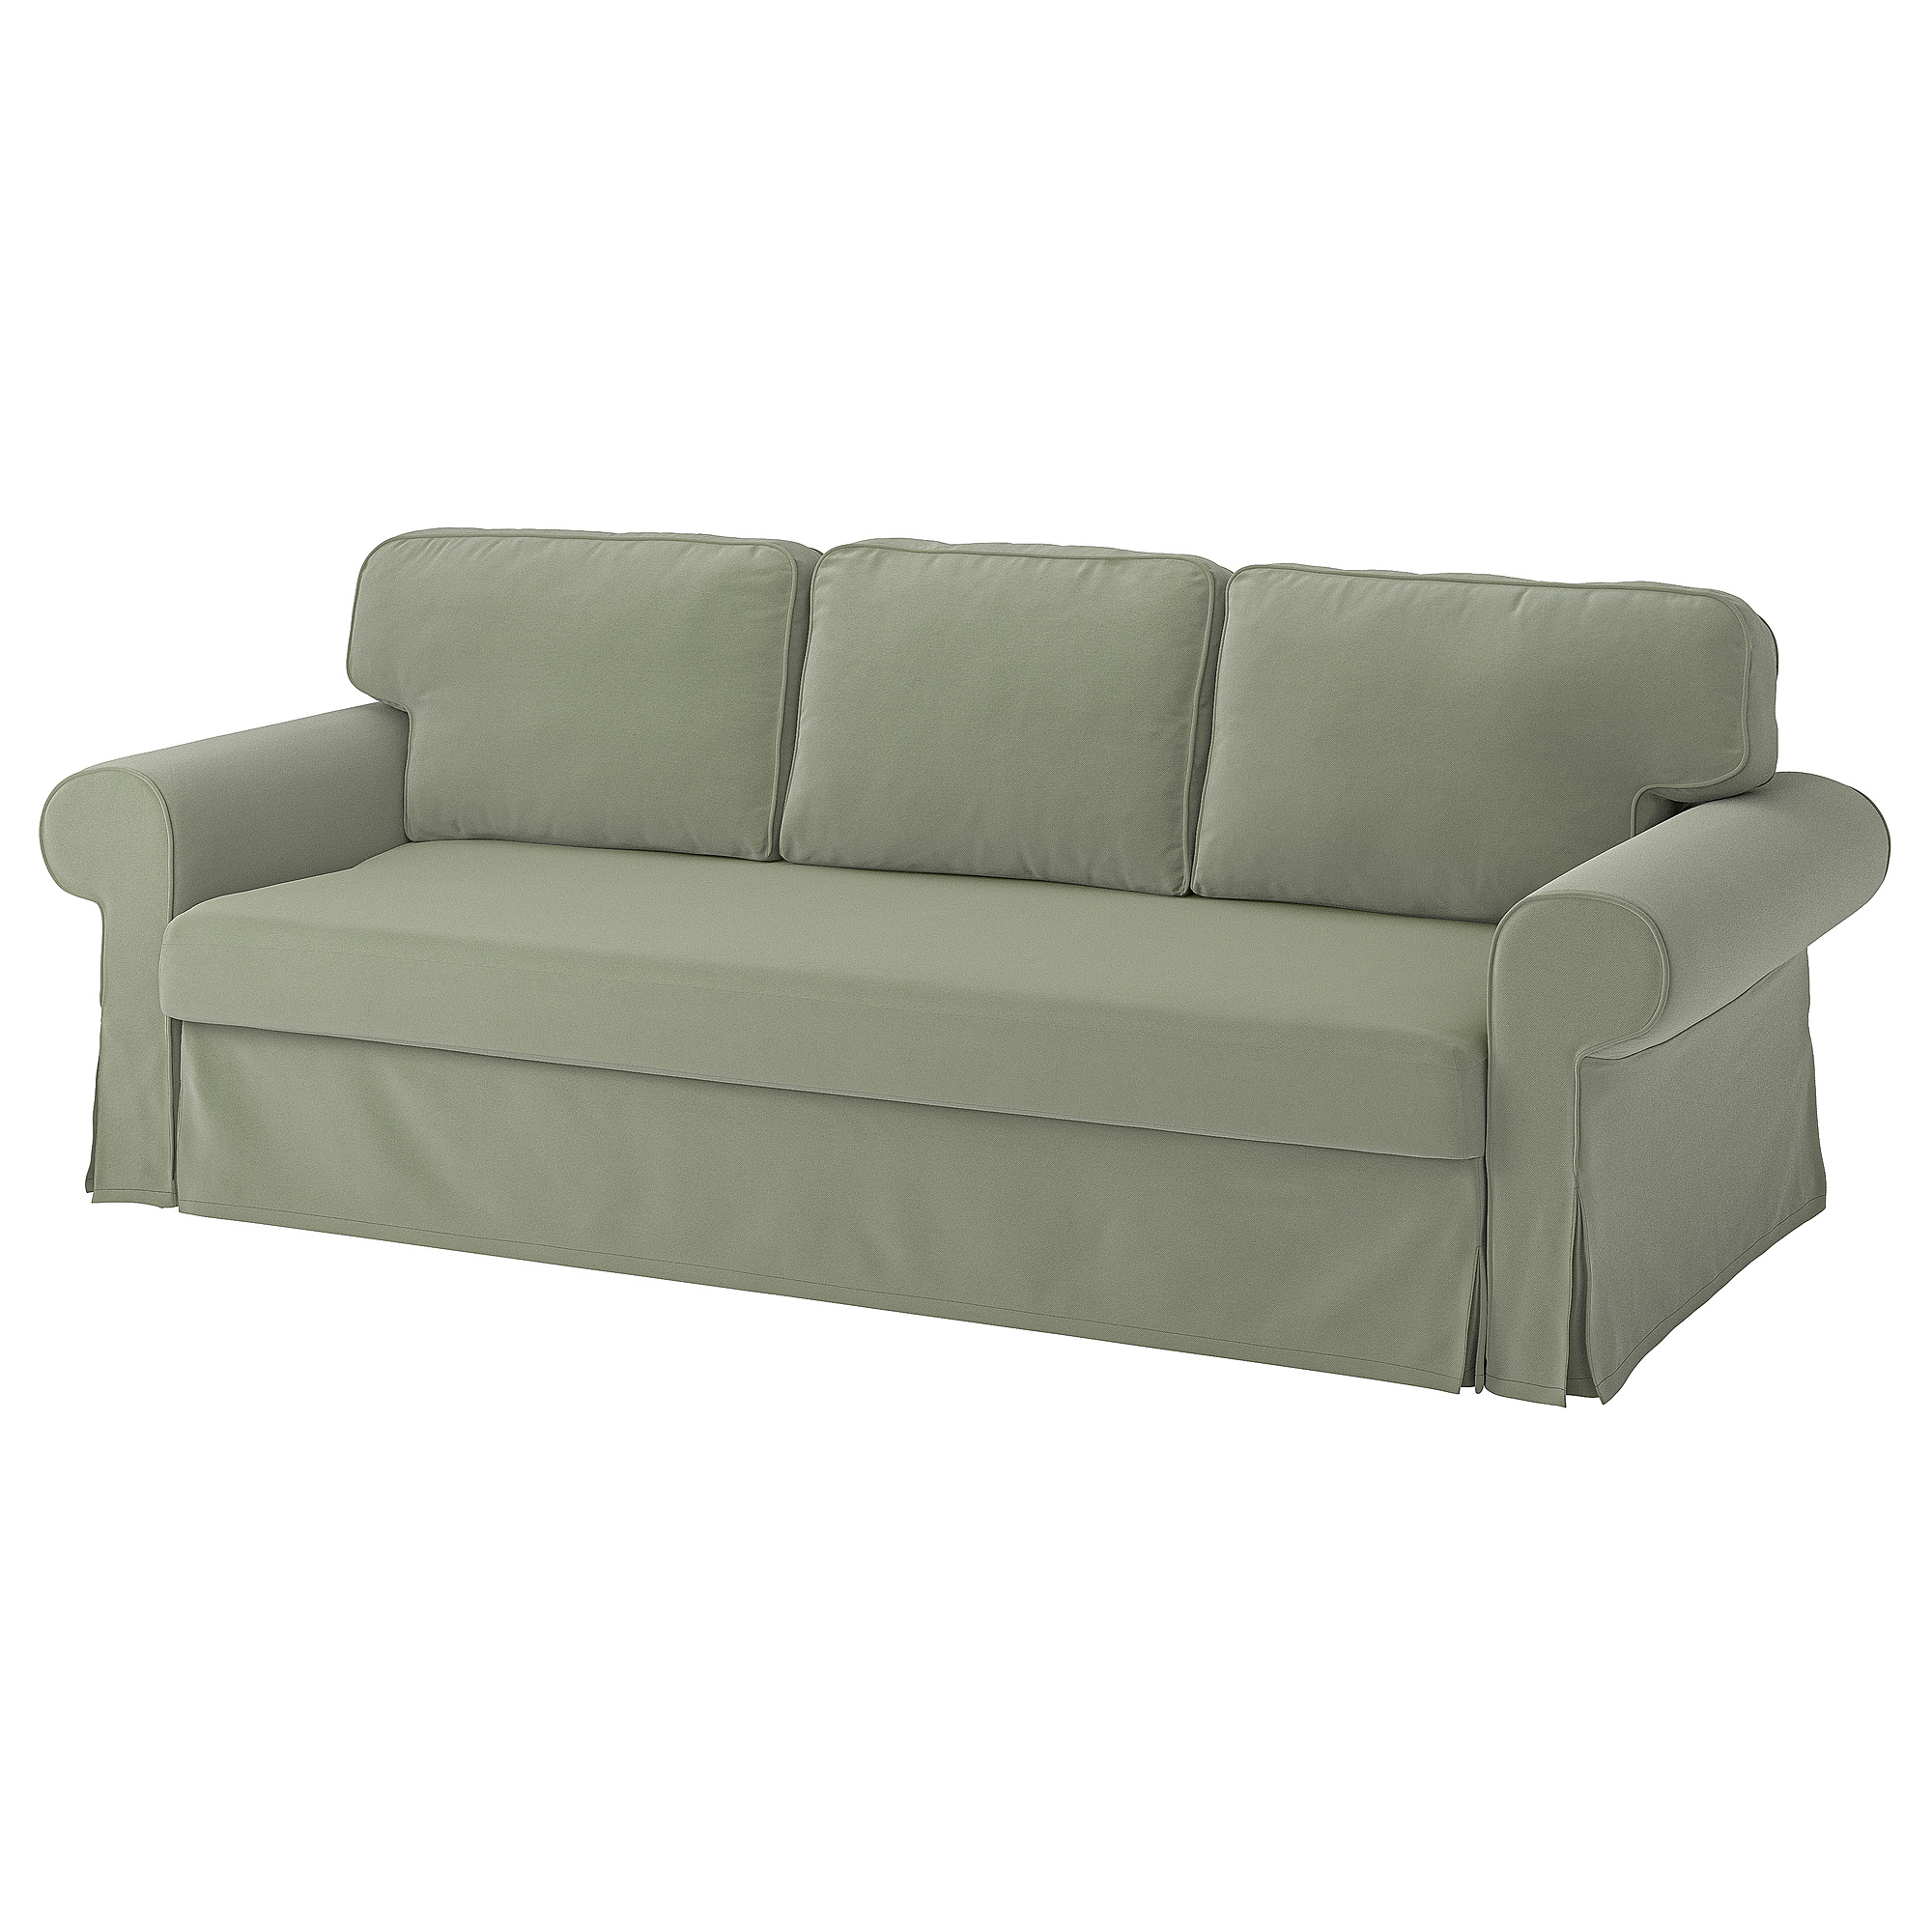 VRETSTORP cover for 3-seat sofa-bed